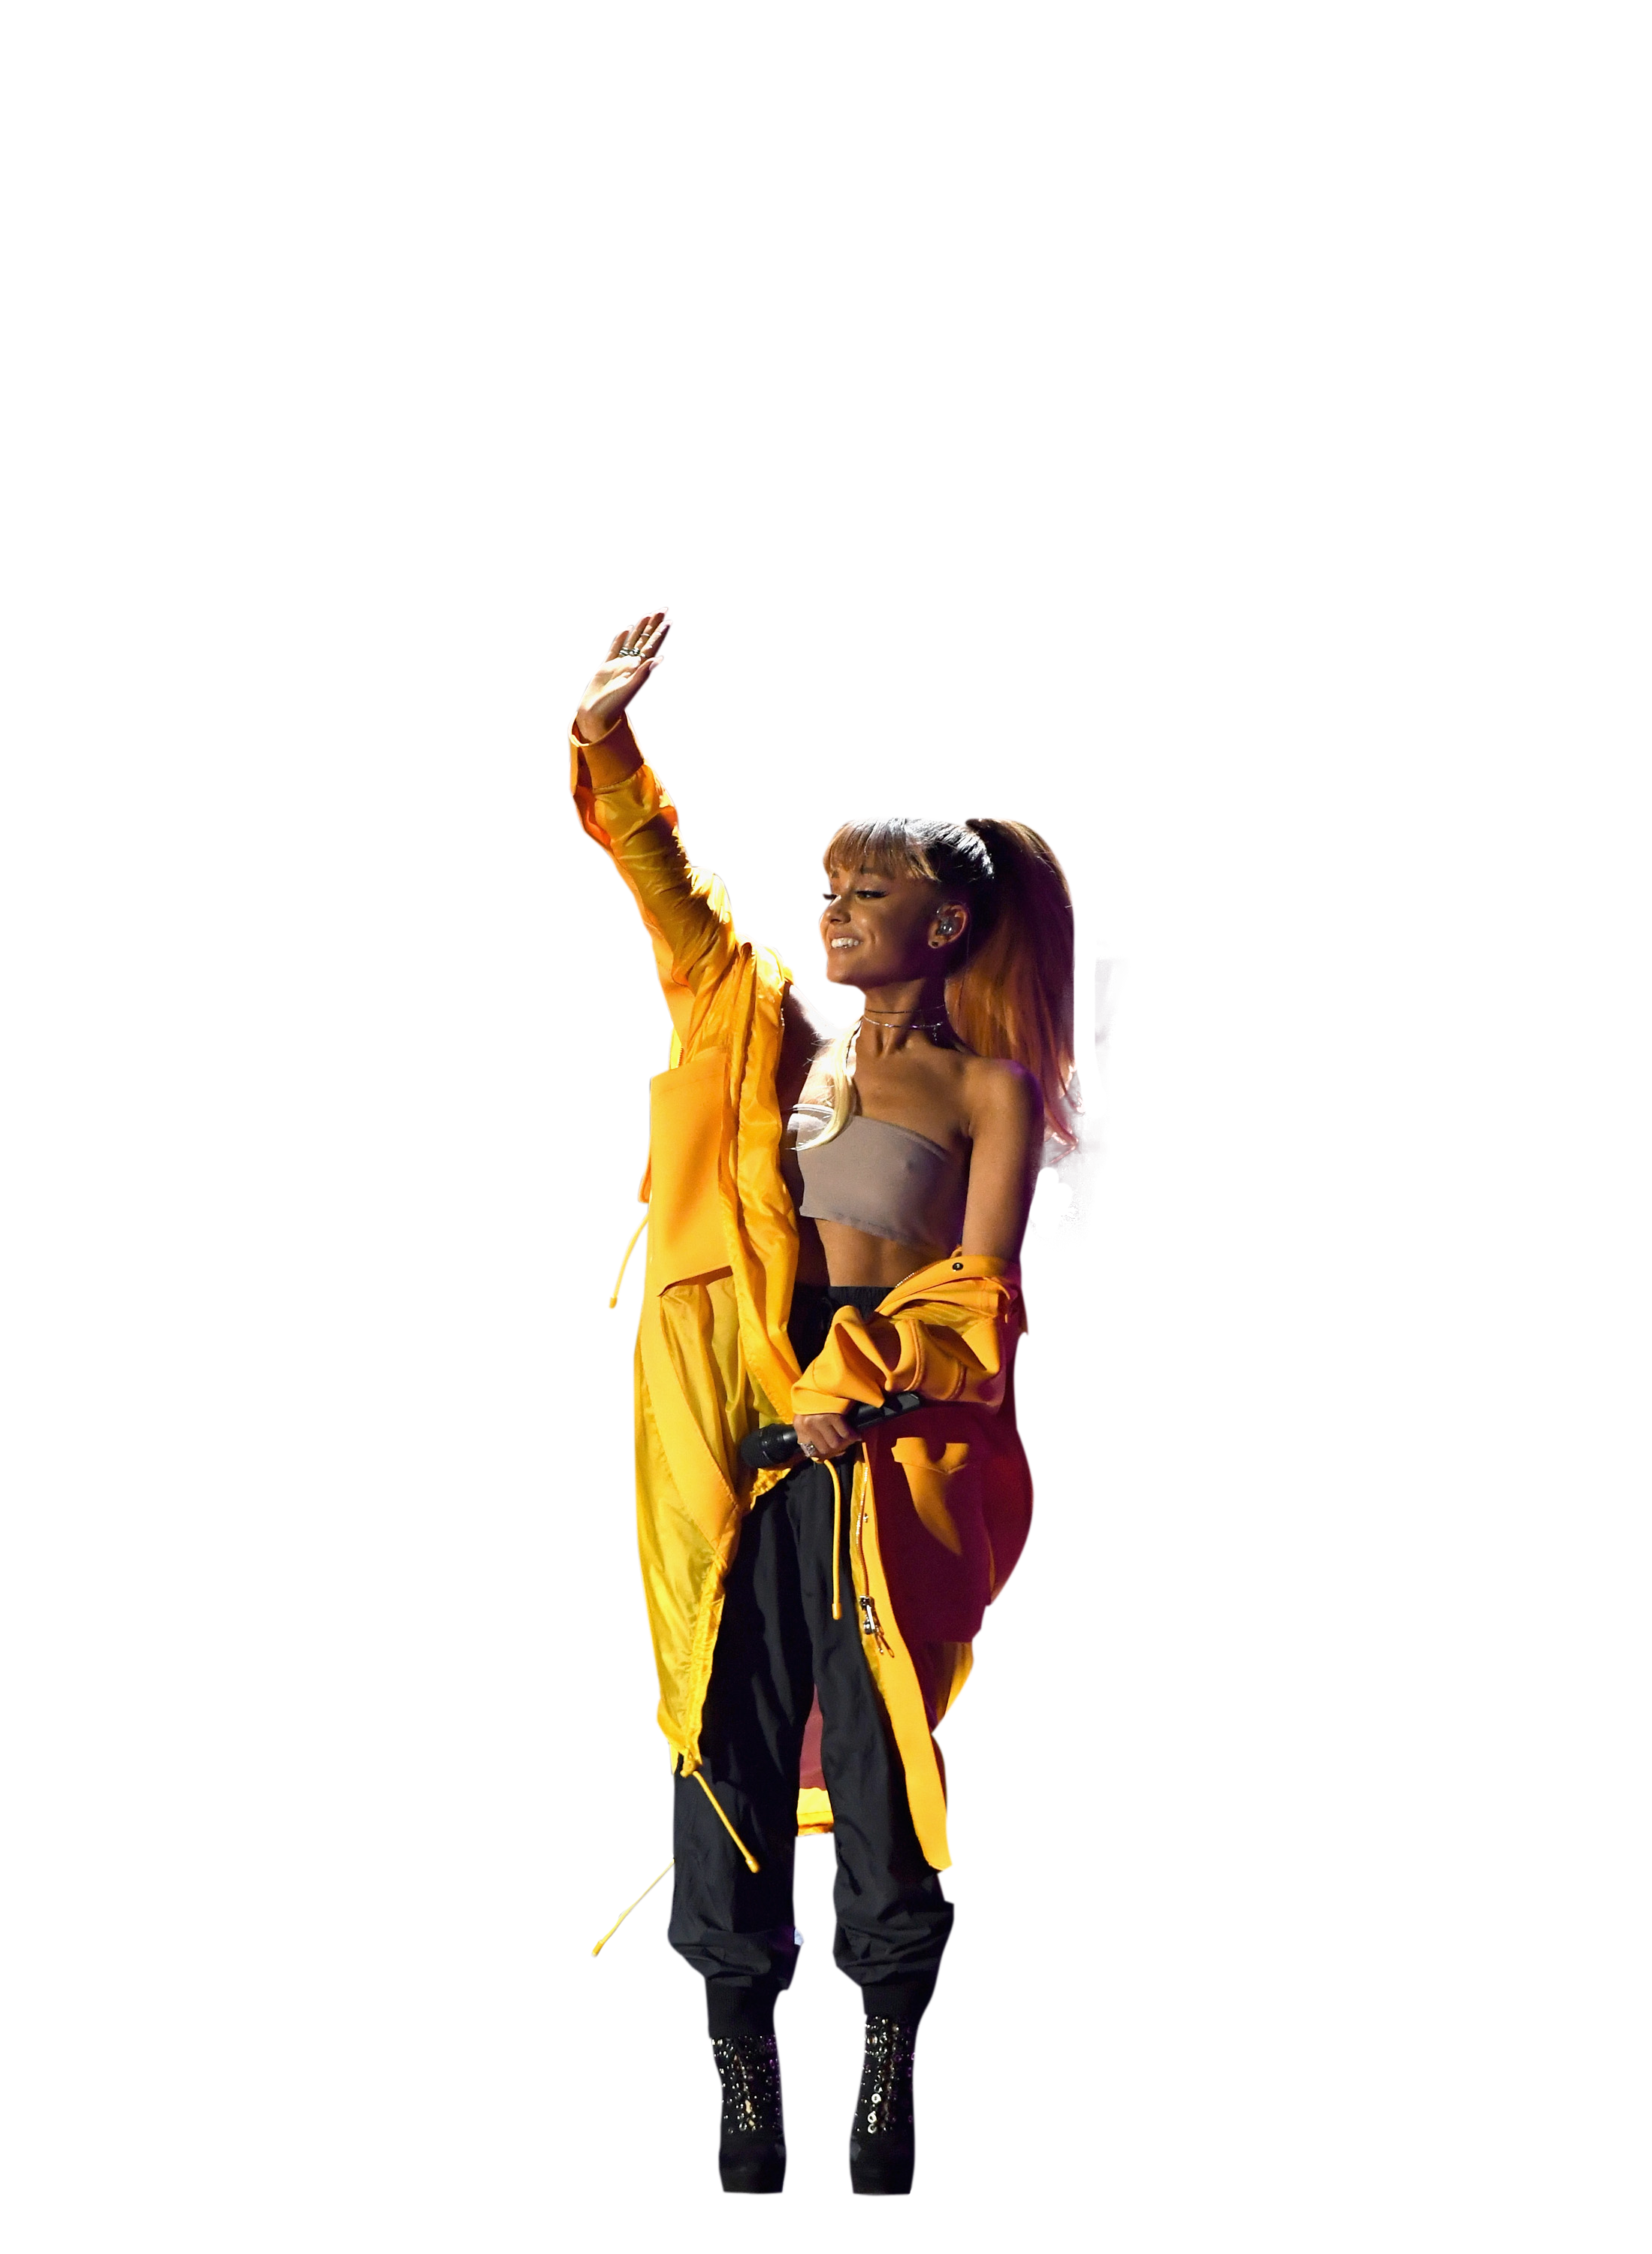 Ariana Grande in yellow dress on stage PNG Image